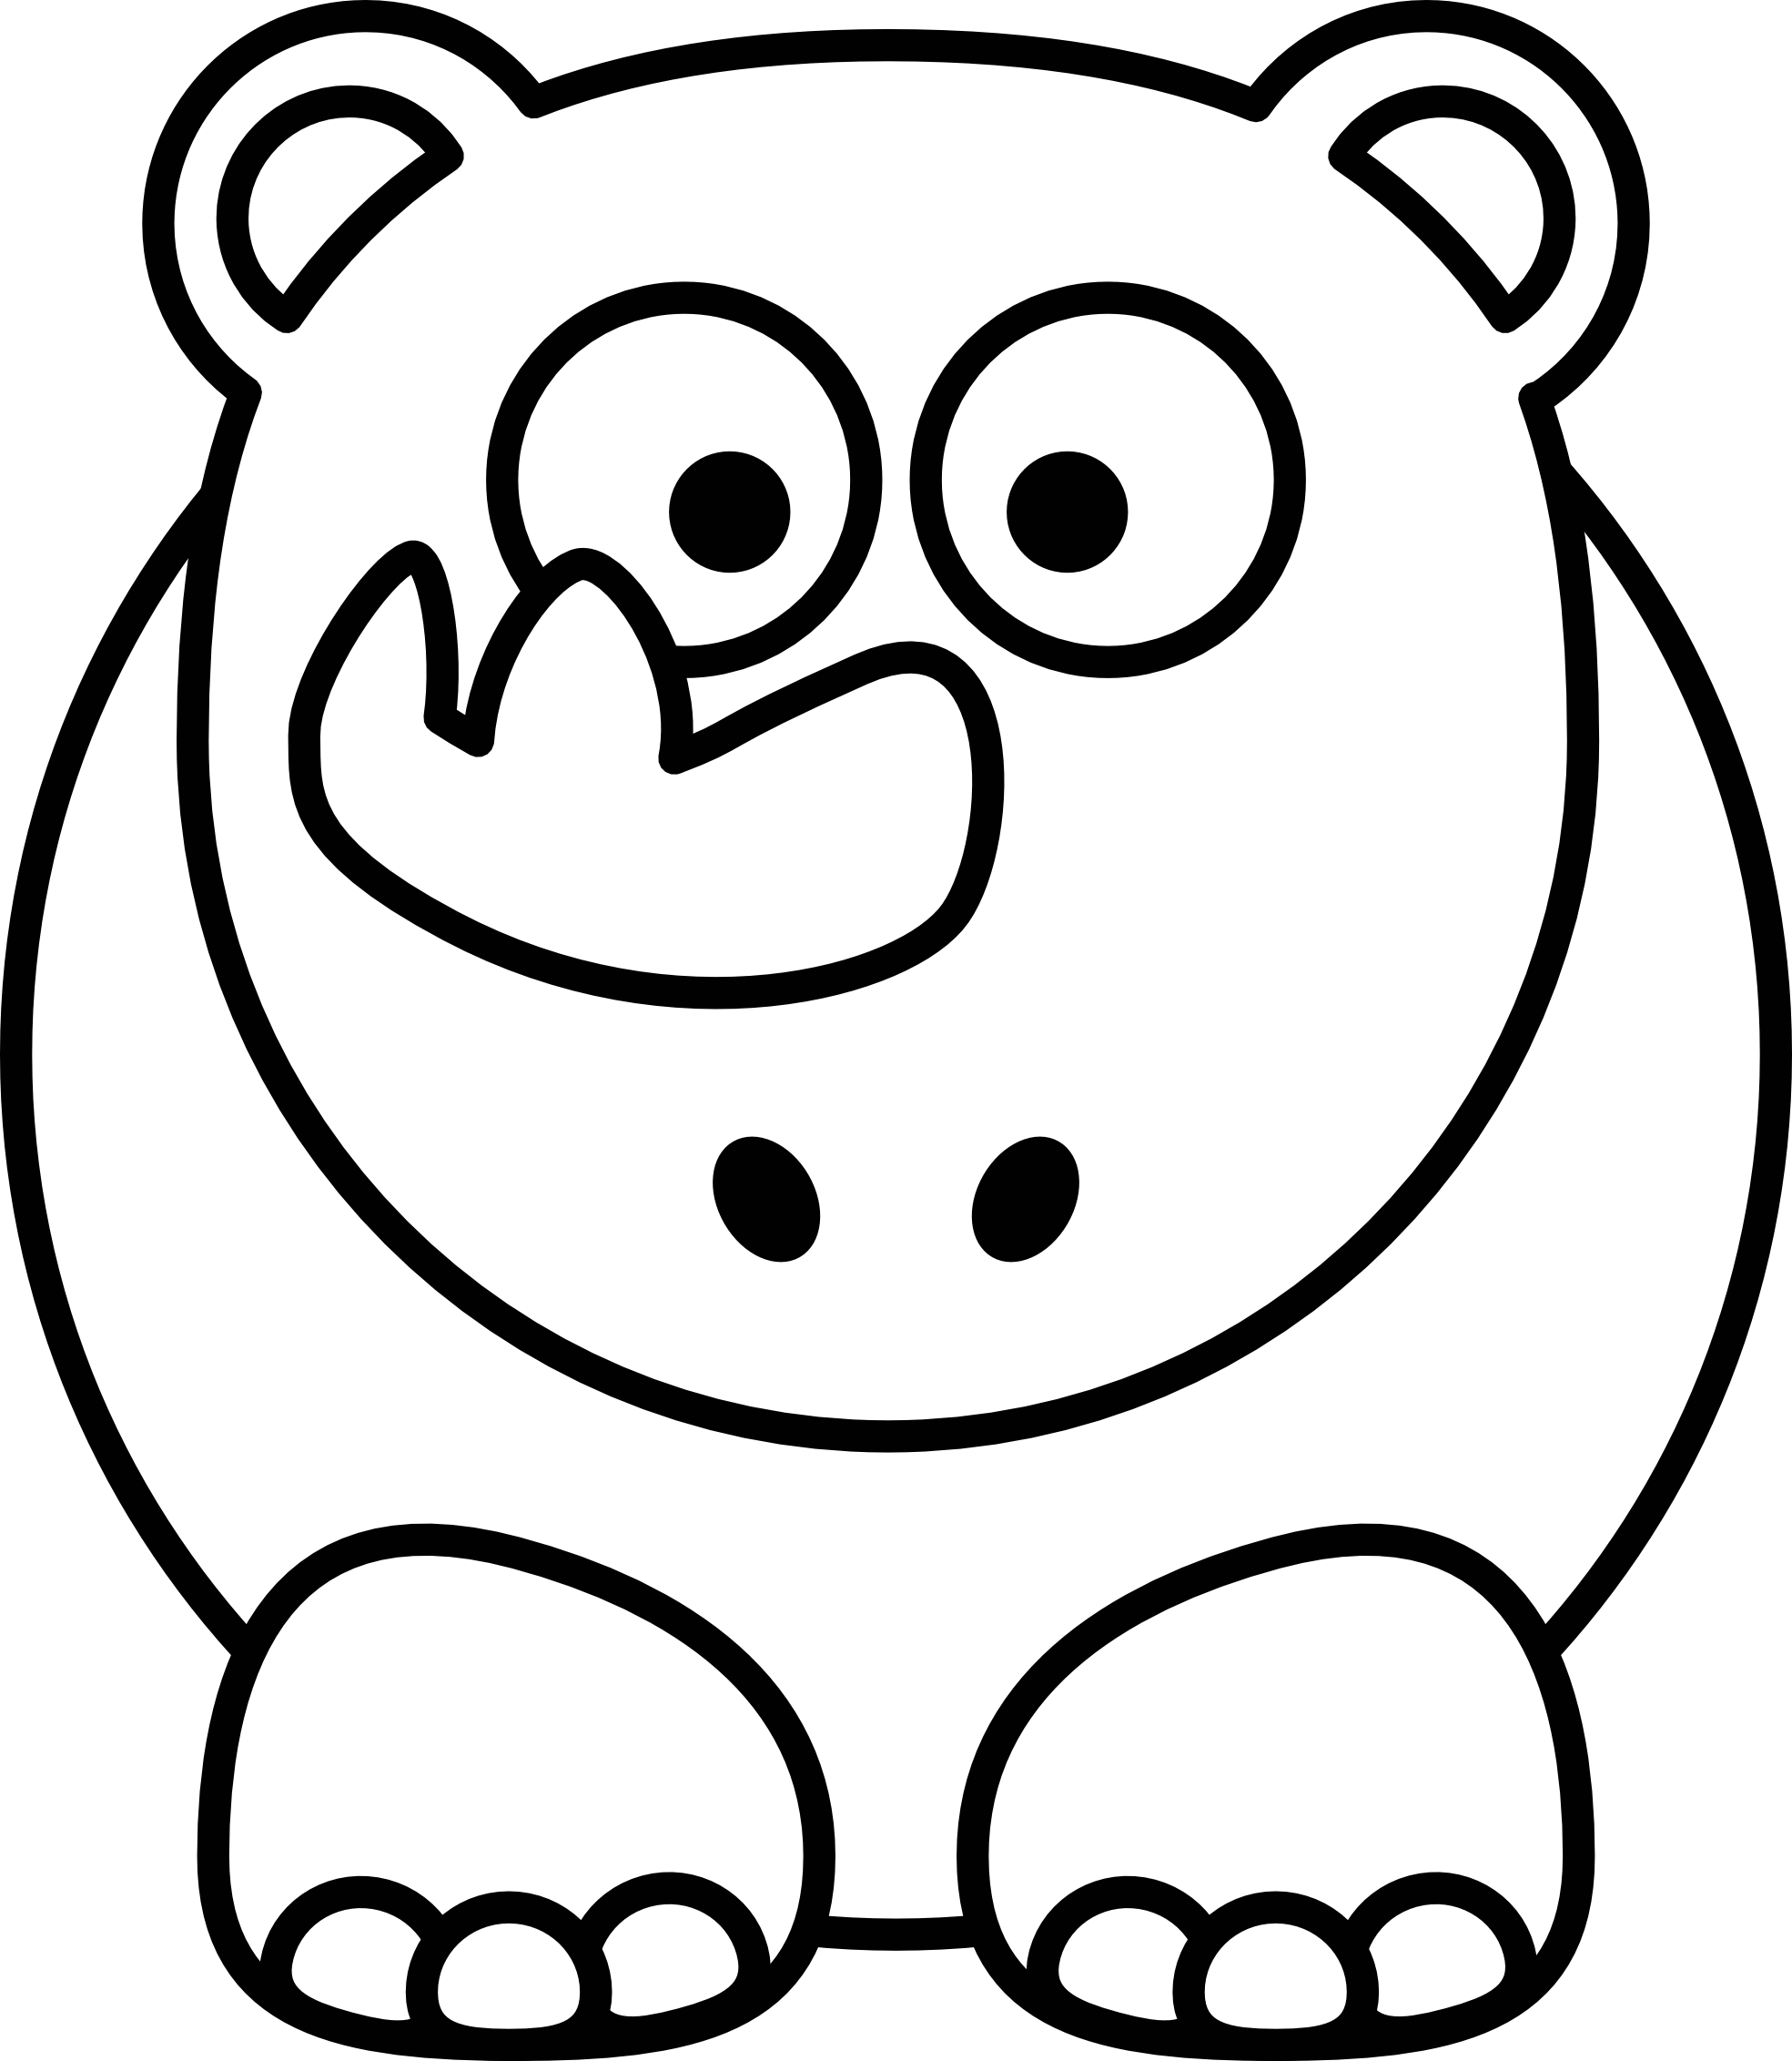 Picture Of Rhino Cartoon - ClipArt Best